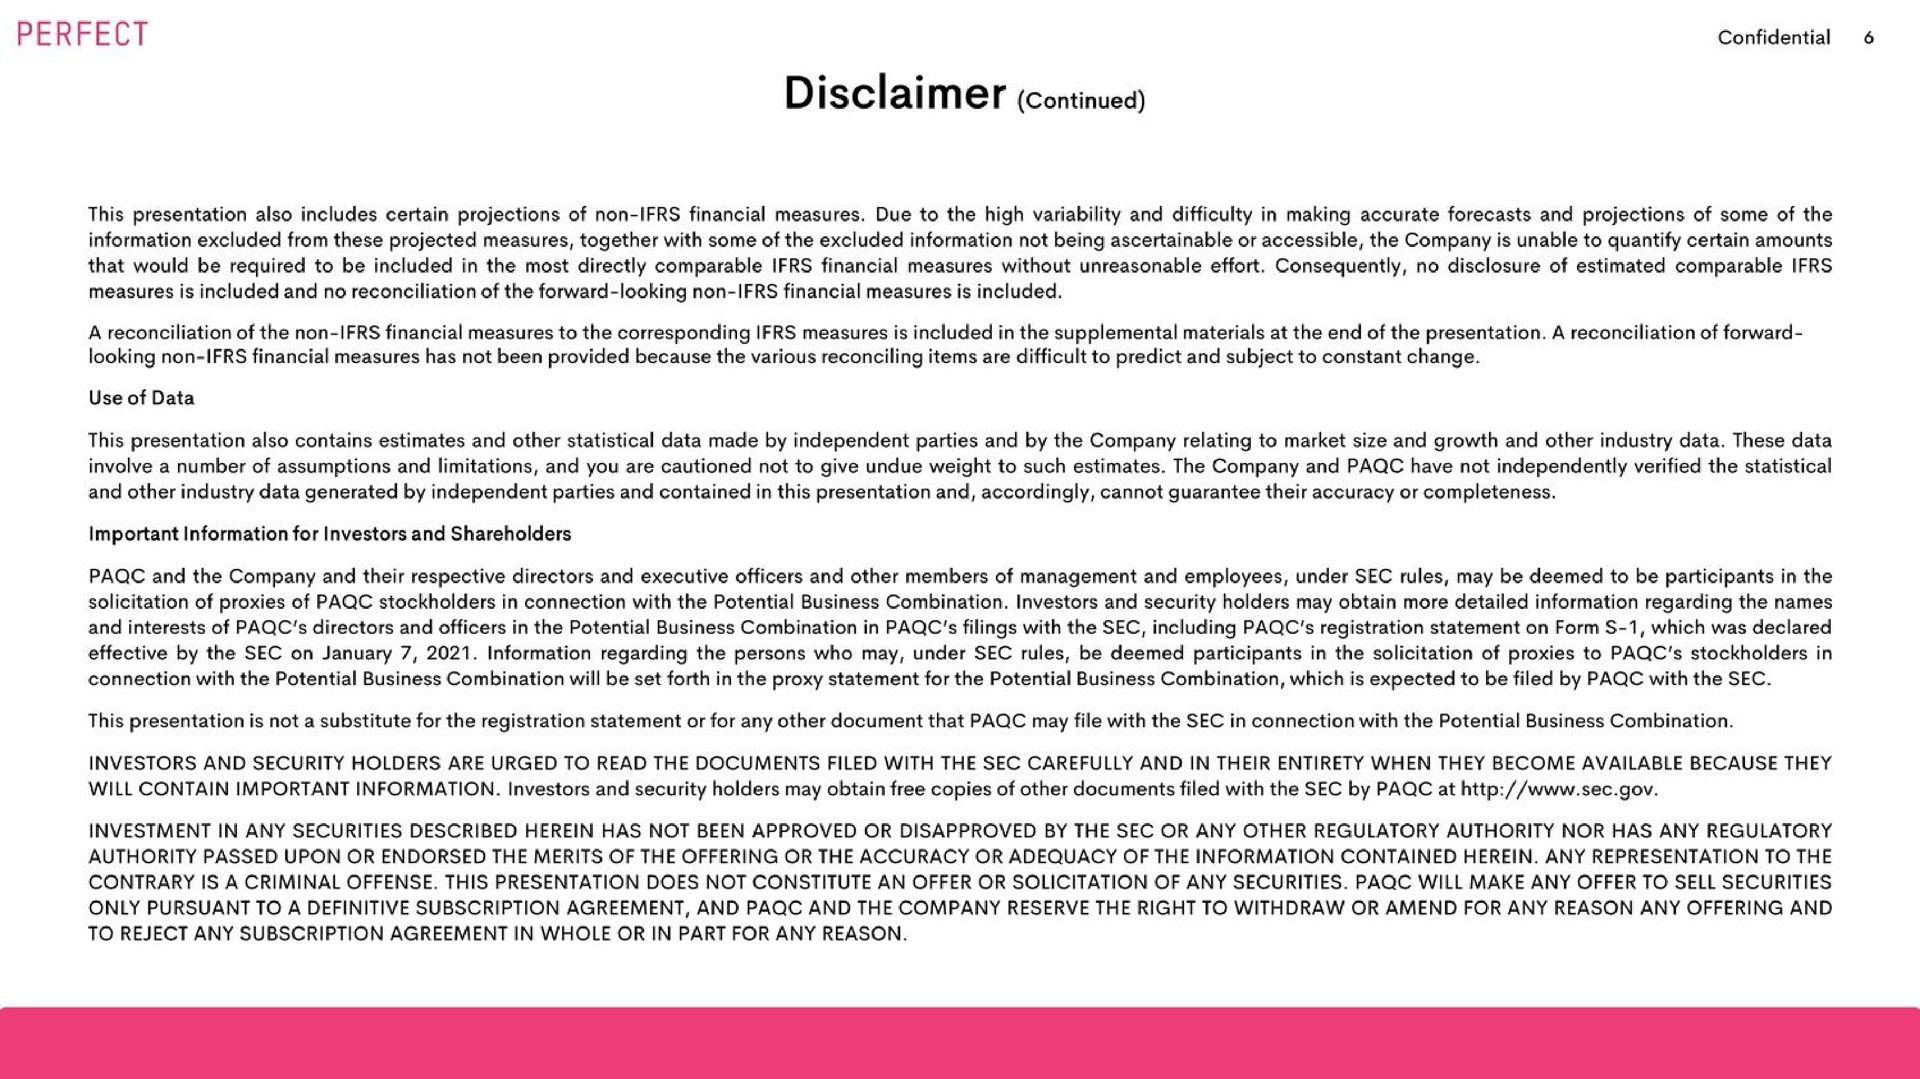 disclaimer continued | Perfect